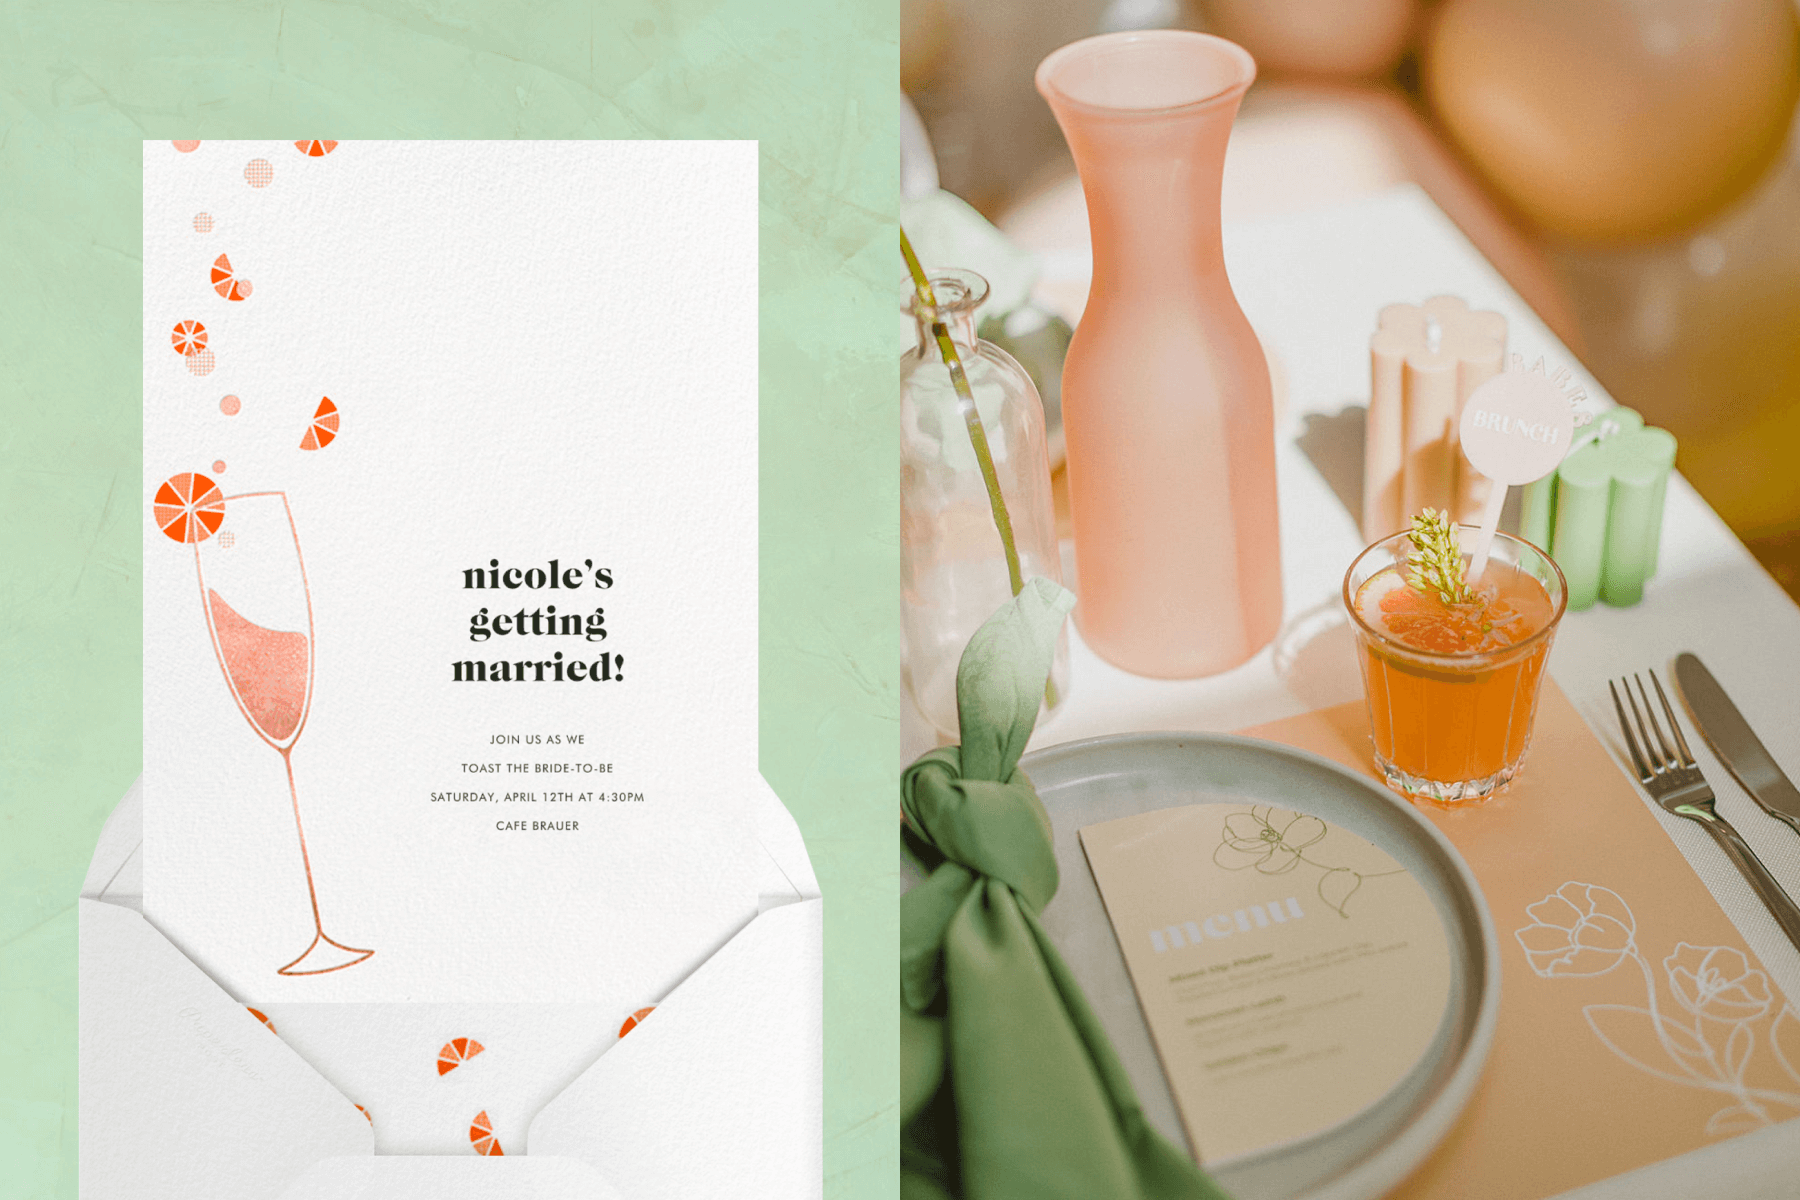 Left: A bridal shower invitation featuring a bellini cocktail illustration; right: close-up photograph of a peach and green table setting.